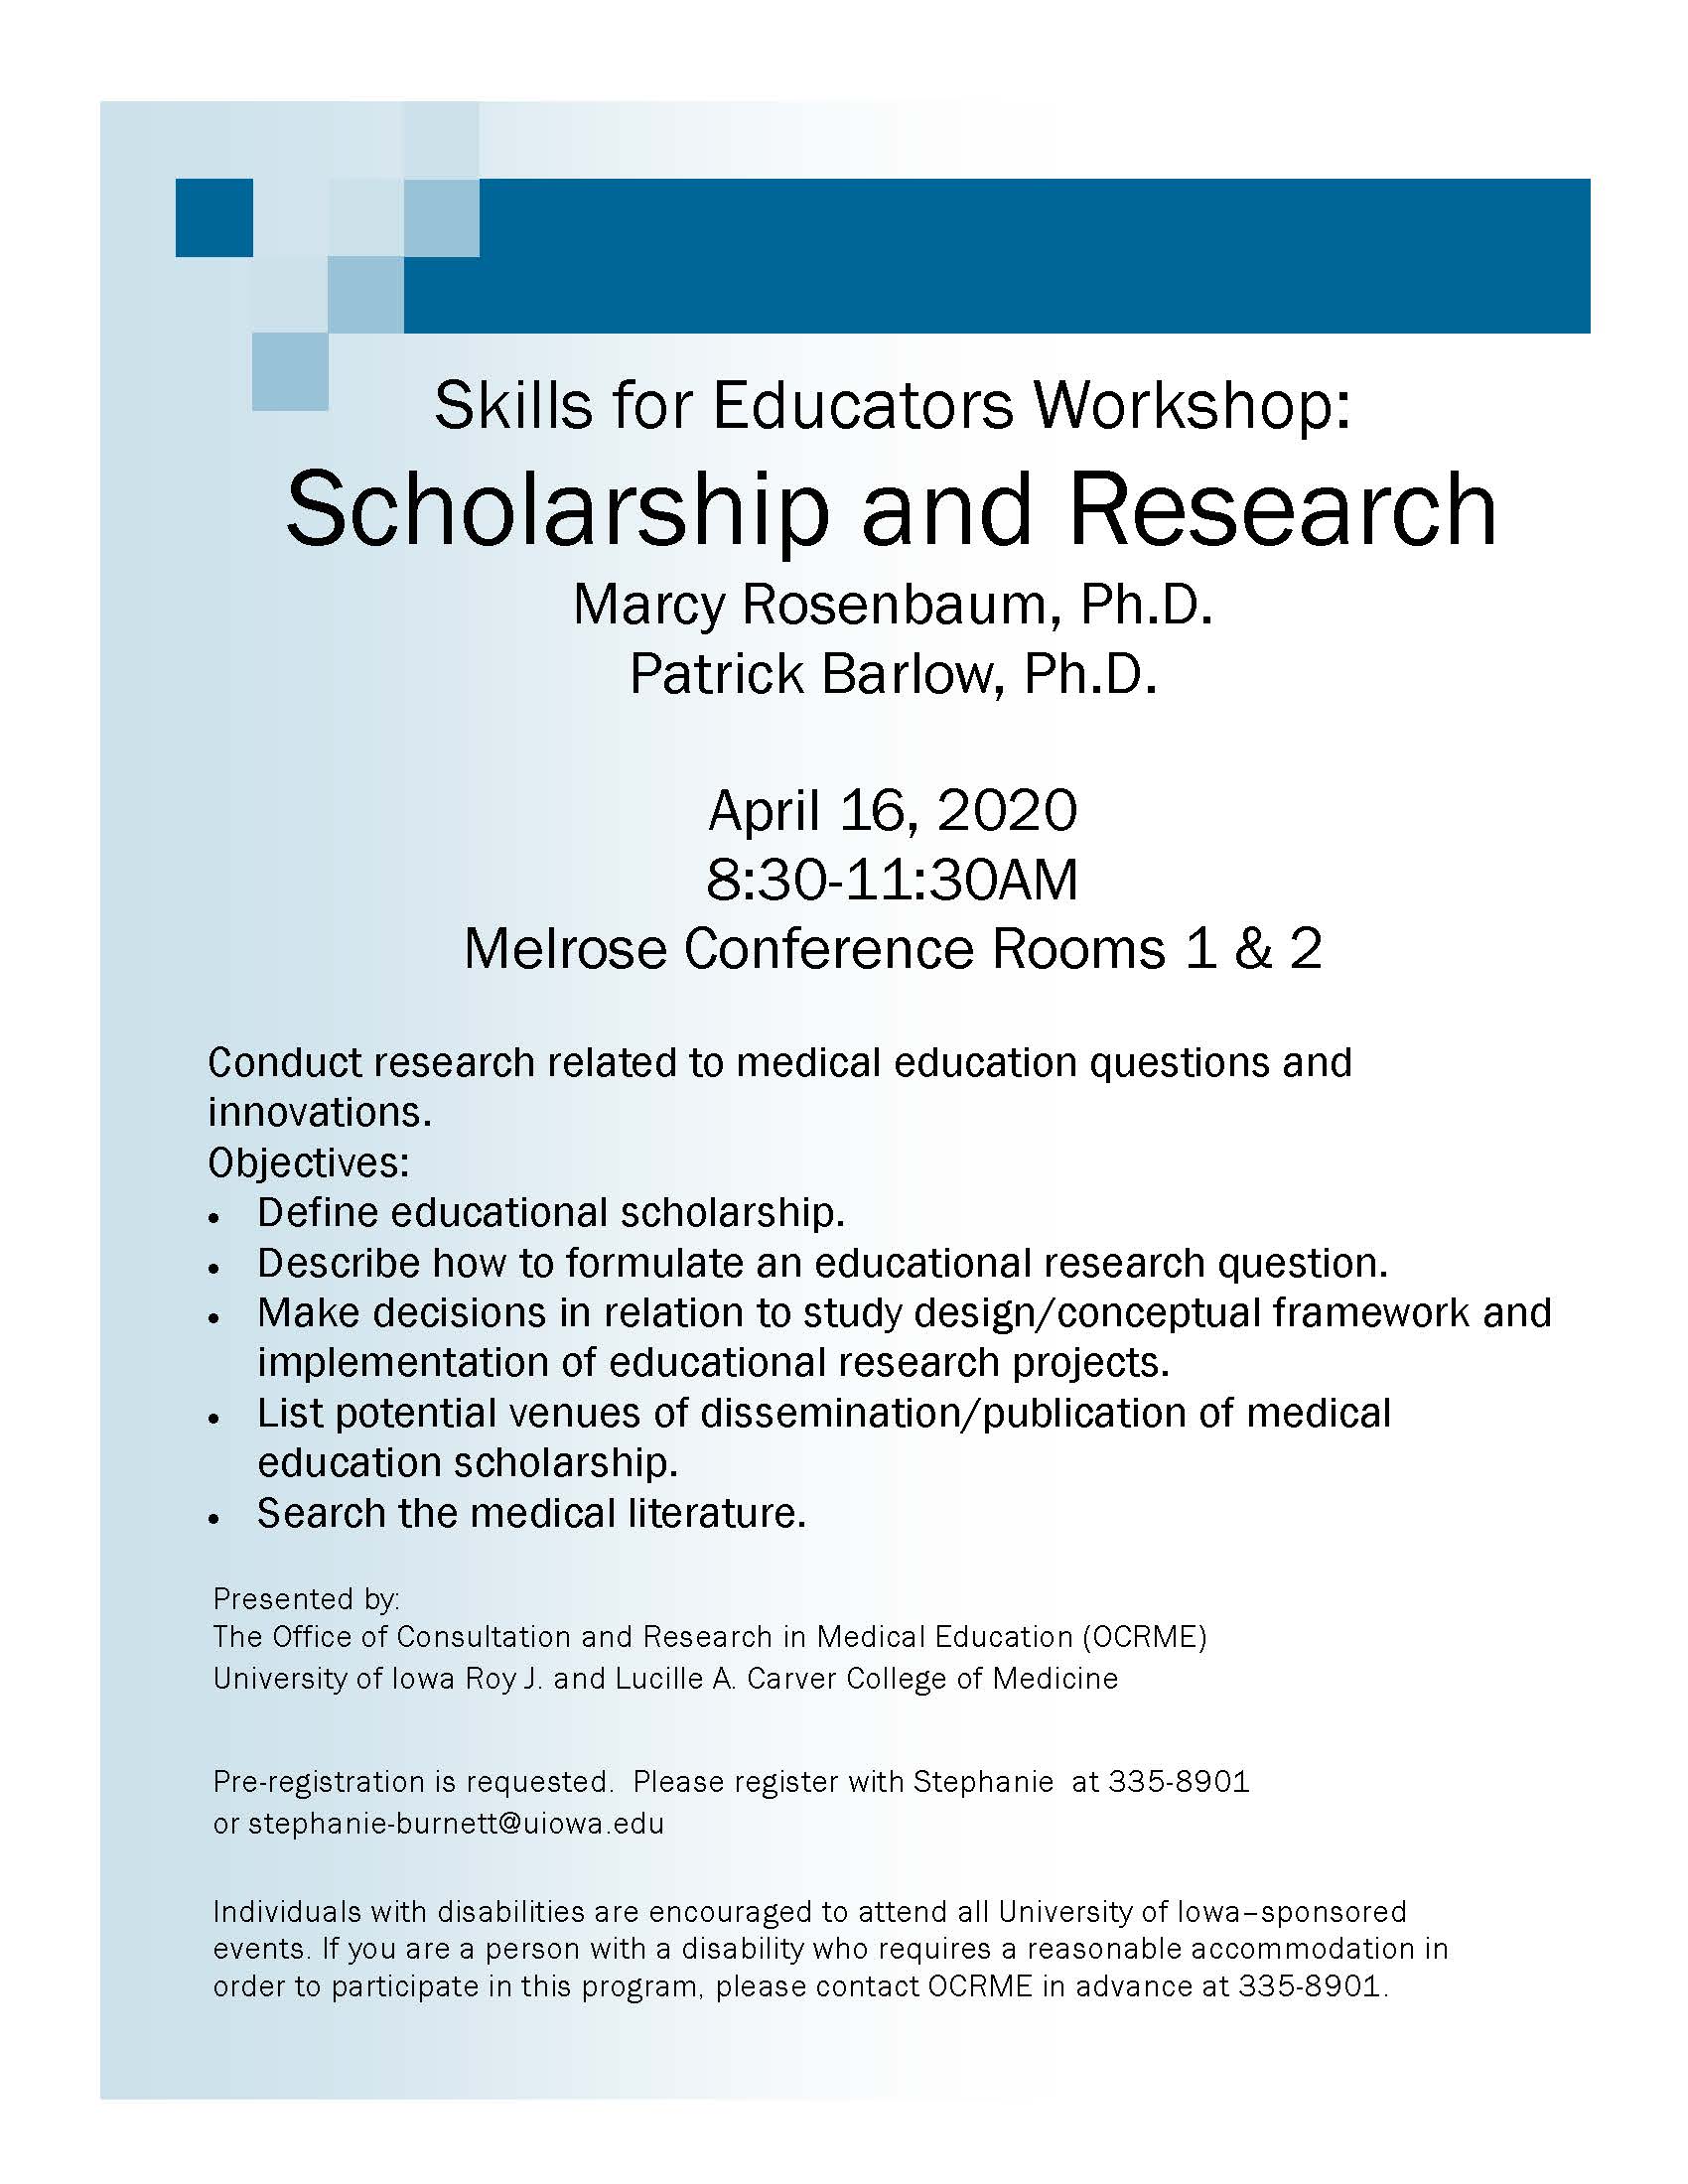 Skills for Educators Workshop: Scholarship and Research promotional image